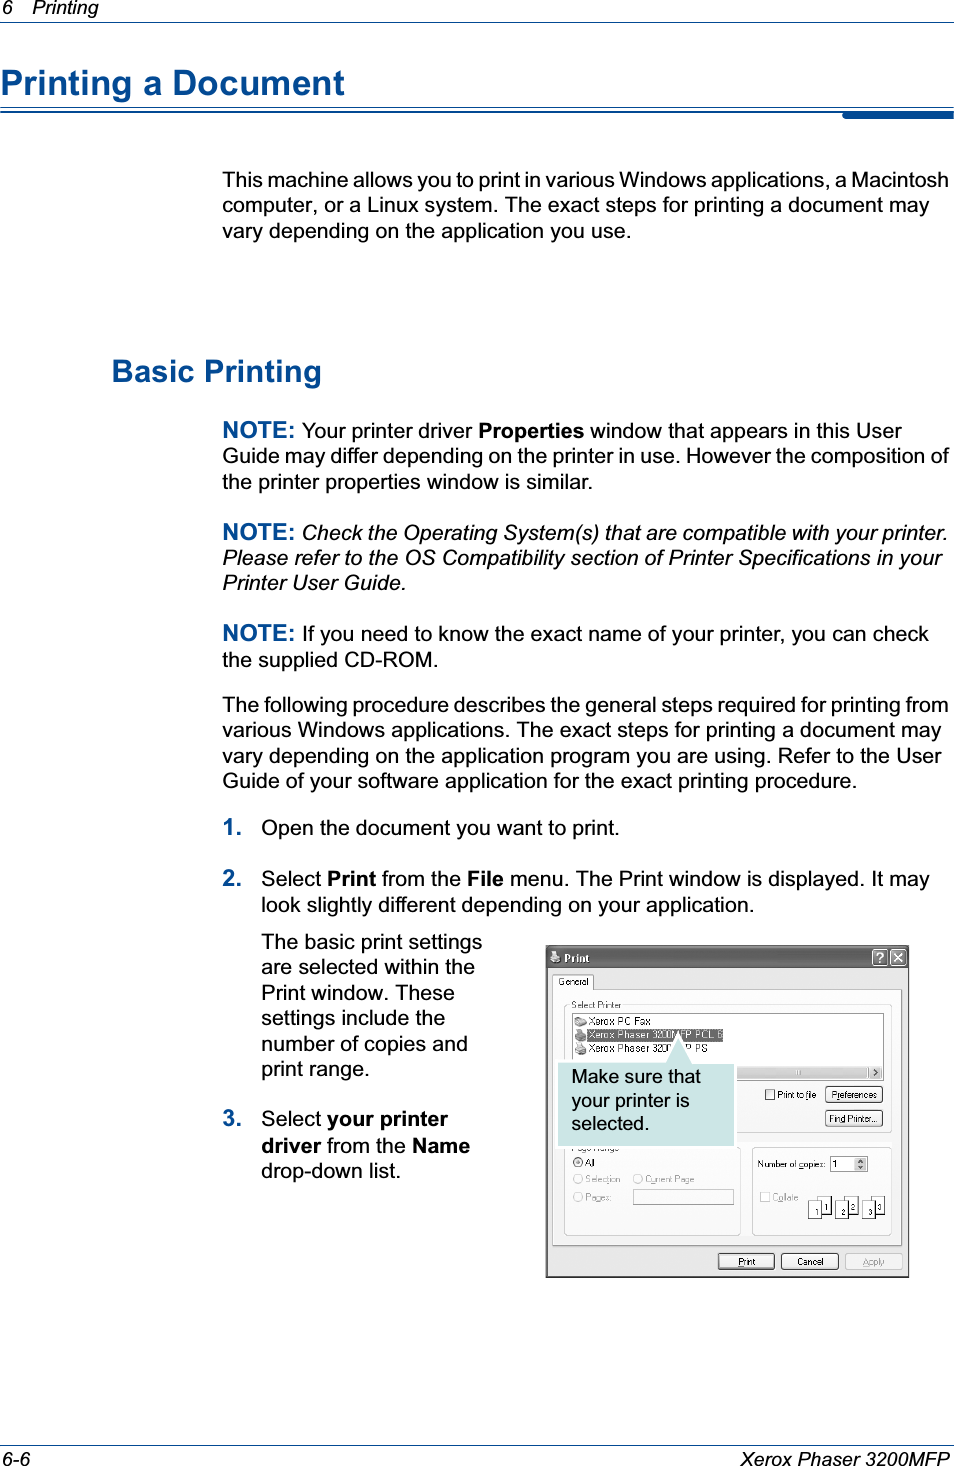 6Printing 6-6 Xerox Phaser 3200MFPPrinting a DocumentThis machine allows you to print in various Windows applications, a Macintosh computer, or a Linux system. The exact steps for printing a document may vary depending on the application you use. Basic PrintingNOTE: Your printer driver Properties window that appears in this User Guide may differ depending on the printer in use. However the composition of the printer properties window is similar.NOTE: Check the Operating System(s) that are compatible with your printer. Please refer to the OS Compatibility section of Printer Specifications in your Printer User Guide.NOTE: If you need to know the exact name of your printer, you can check the supplied CD-ROM.The following procedure describes the general steps required for printing from various Windows applications. The exact steps for printing a document may vary depending on the application program you are using. Refer to the User Guide of your software application for the exact printing procedure.1. Open the document you want to print.2. Select Print from the File menu. The Print window is displayed. It may look slightly different depending on your application. The basic print settings are selected within the Print window. These settings include the number of copies and print range.3. Select your printer driver from the Namedrop-down list.Make sure that your printer is selected.